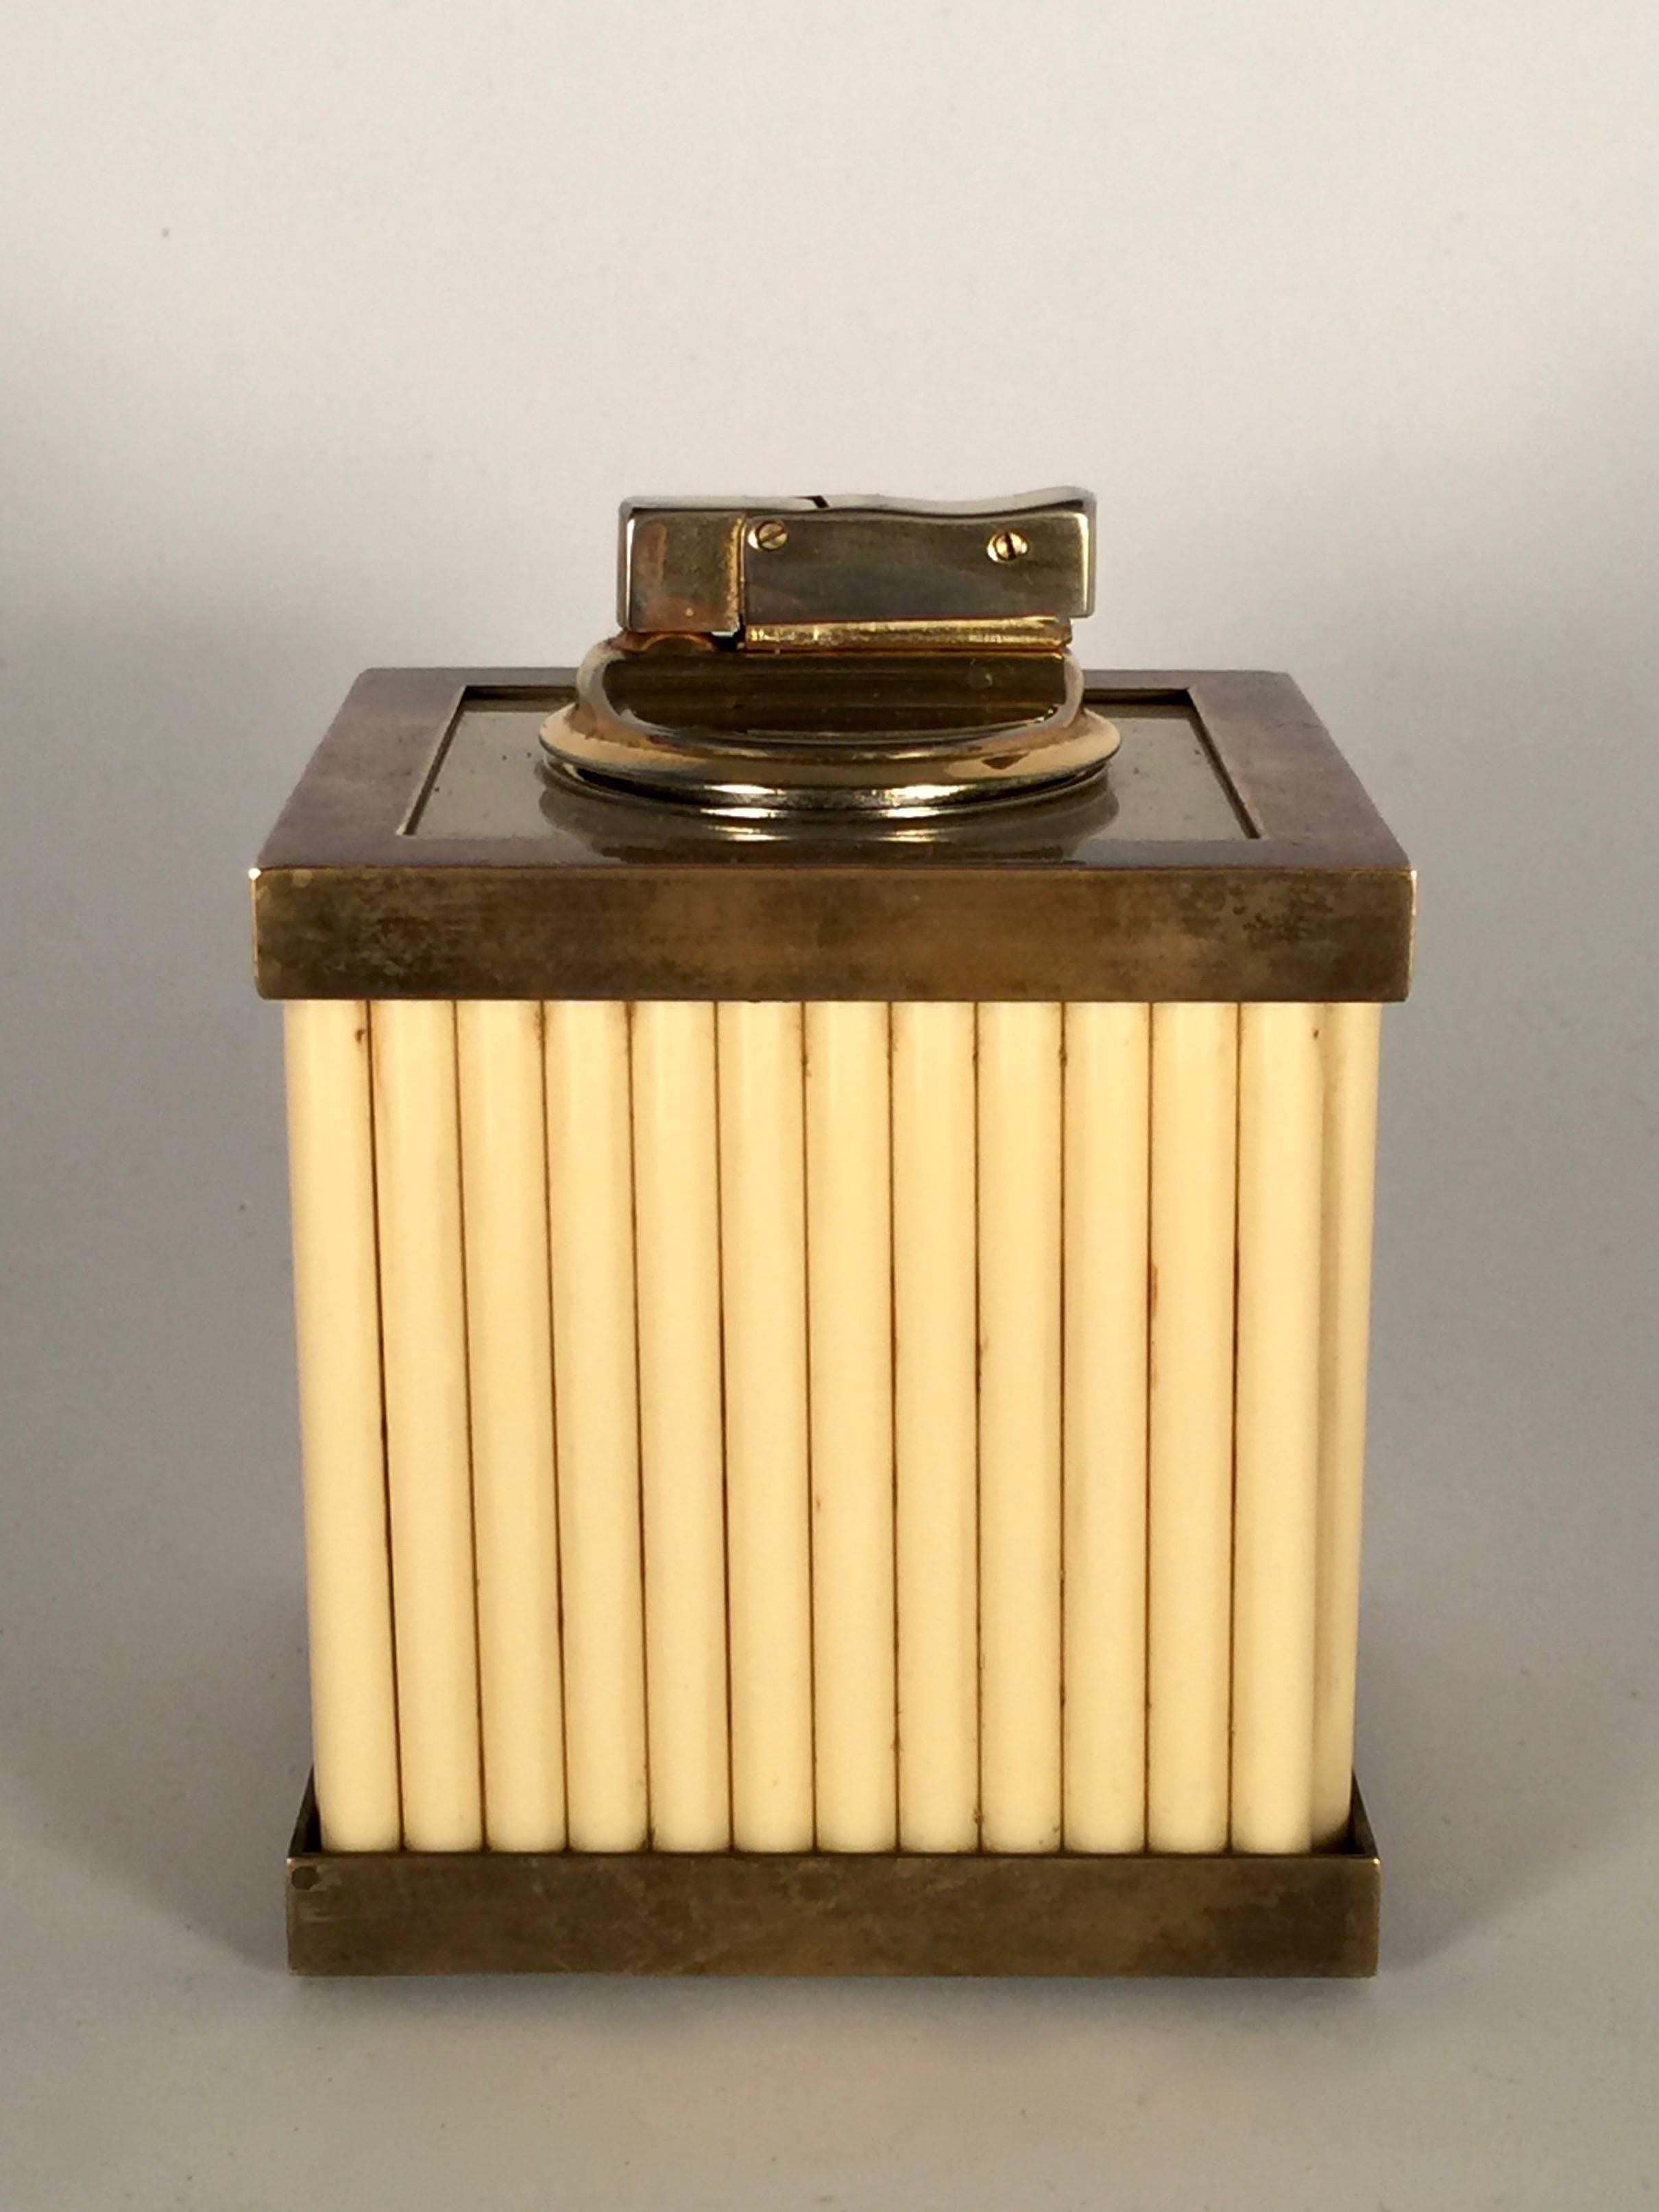 Vintage Tommaso Barbi Lucite and brass table lighter.
1970s made in Italy. 

An amazing and seldom piece in this condition. Some abrasion on the brass detail. Look carefully at the pictures.

Please notice this item need flint and gas.